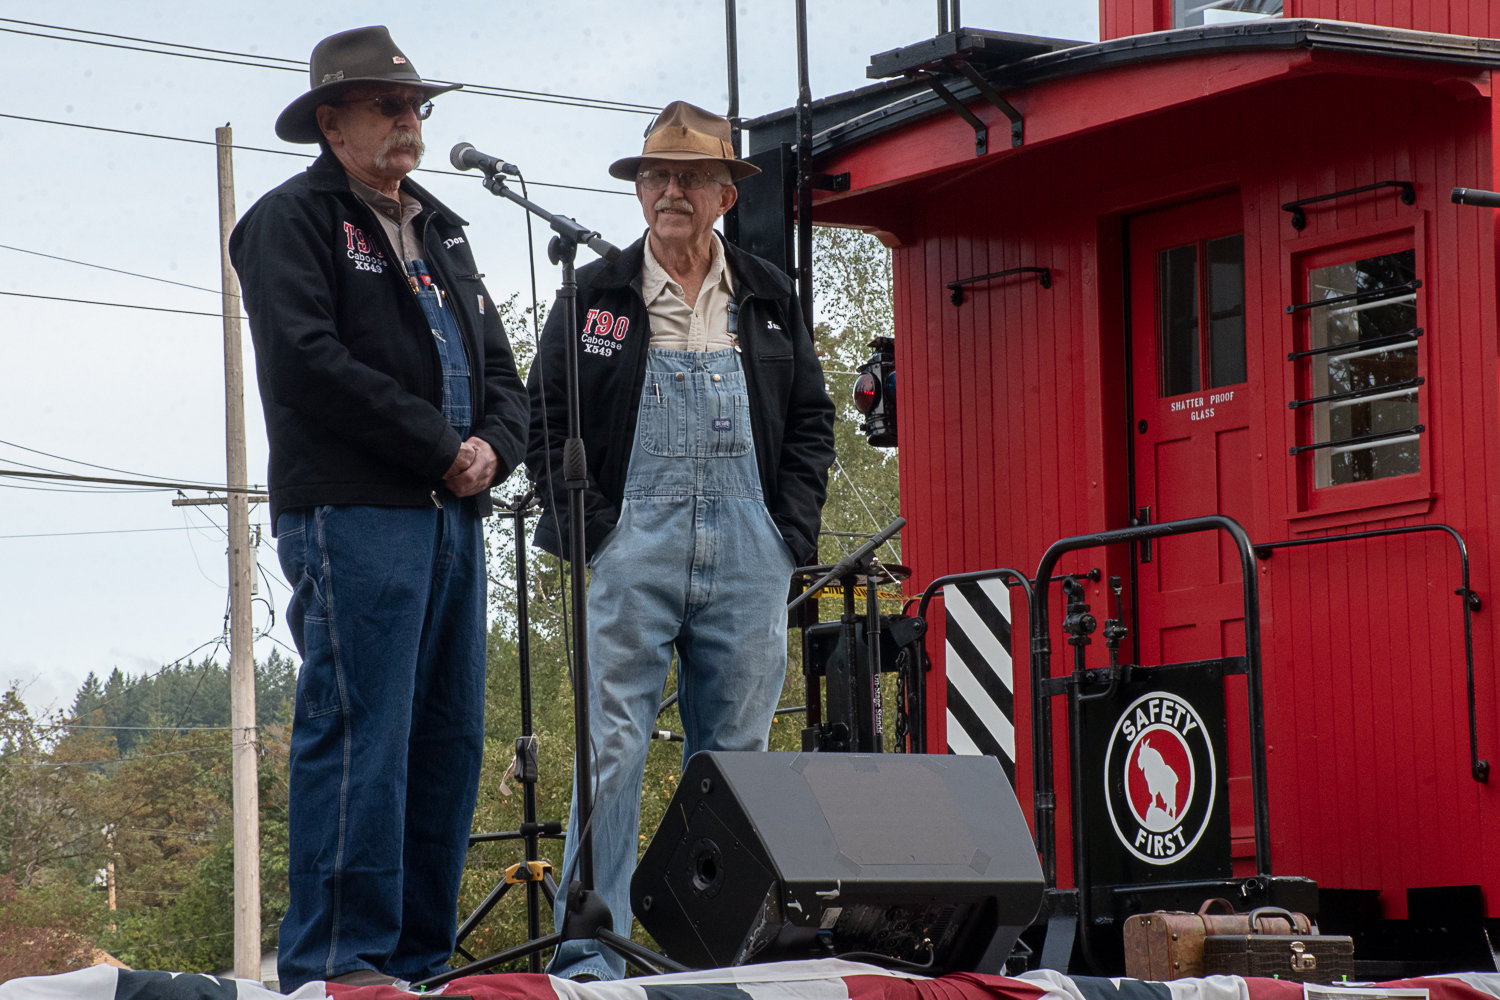 Don Bowman, left, and Jan Wigley, right, talk a crowd of around 100 people about restoration work they did over the past two years on the caboose for the Tenino Depot Museum.